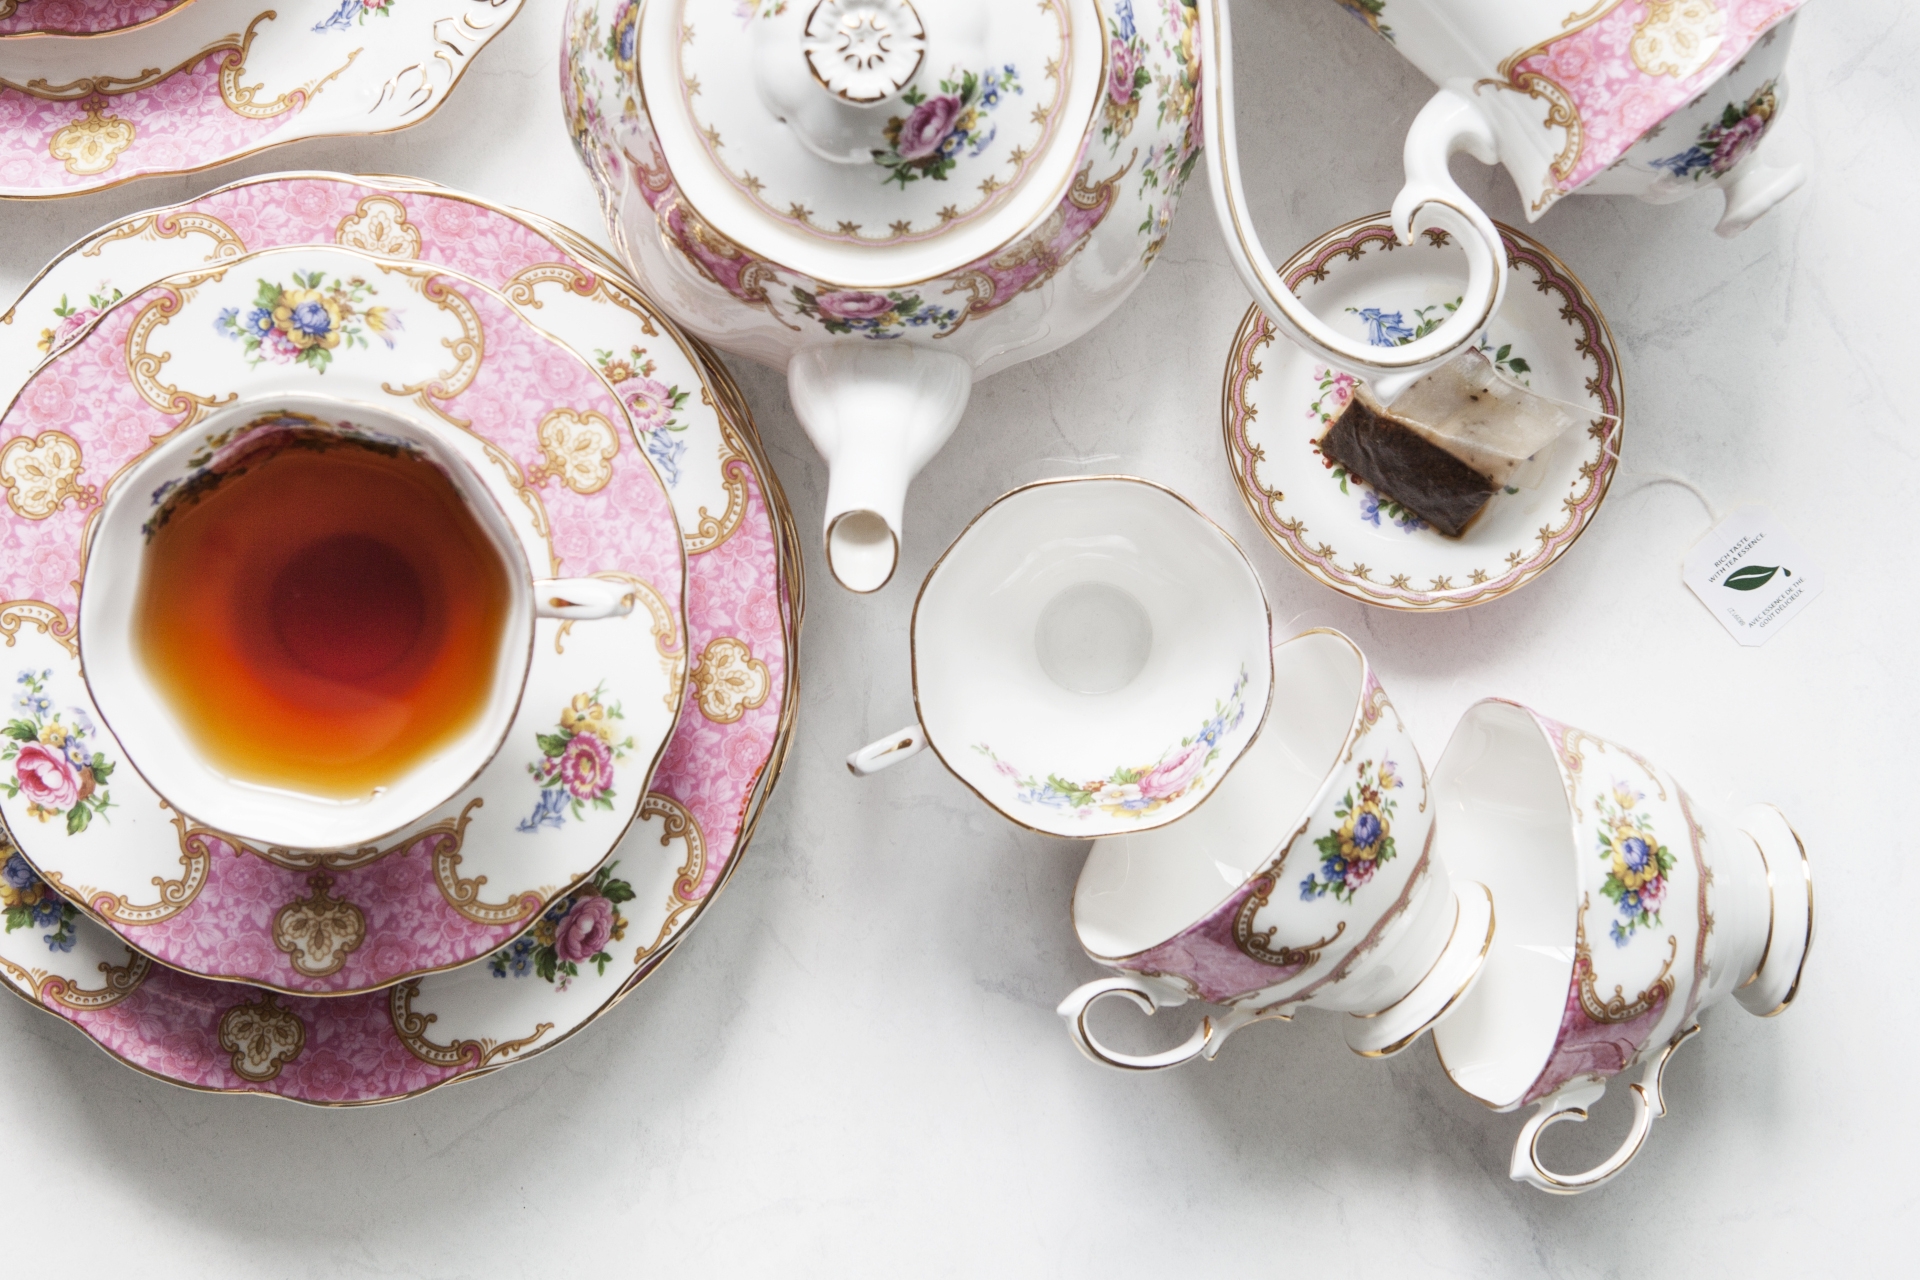 10 Instagrammable Afternoon Teas - Getty Images